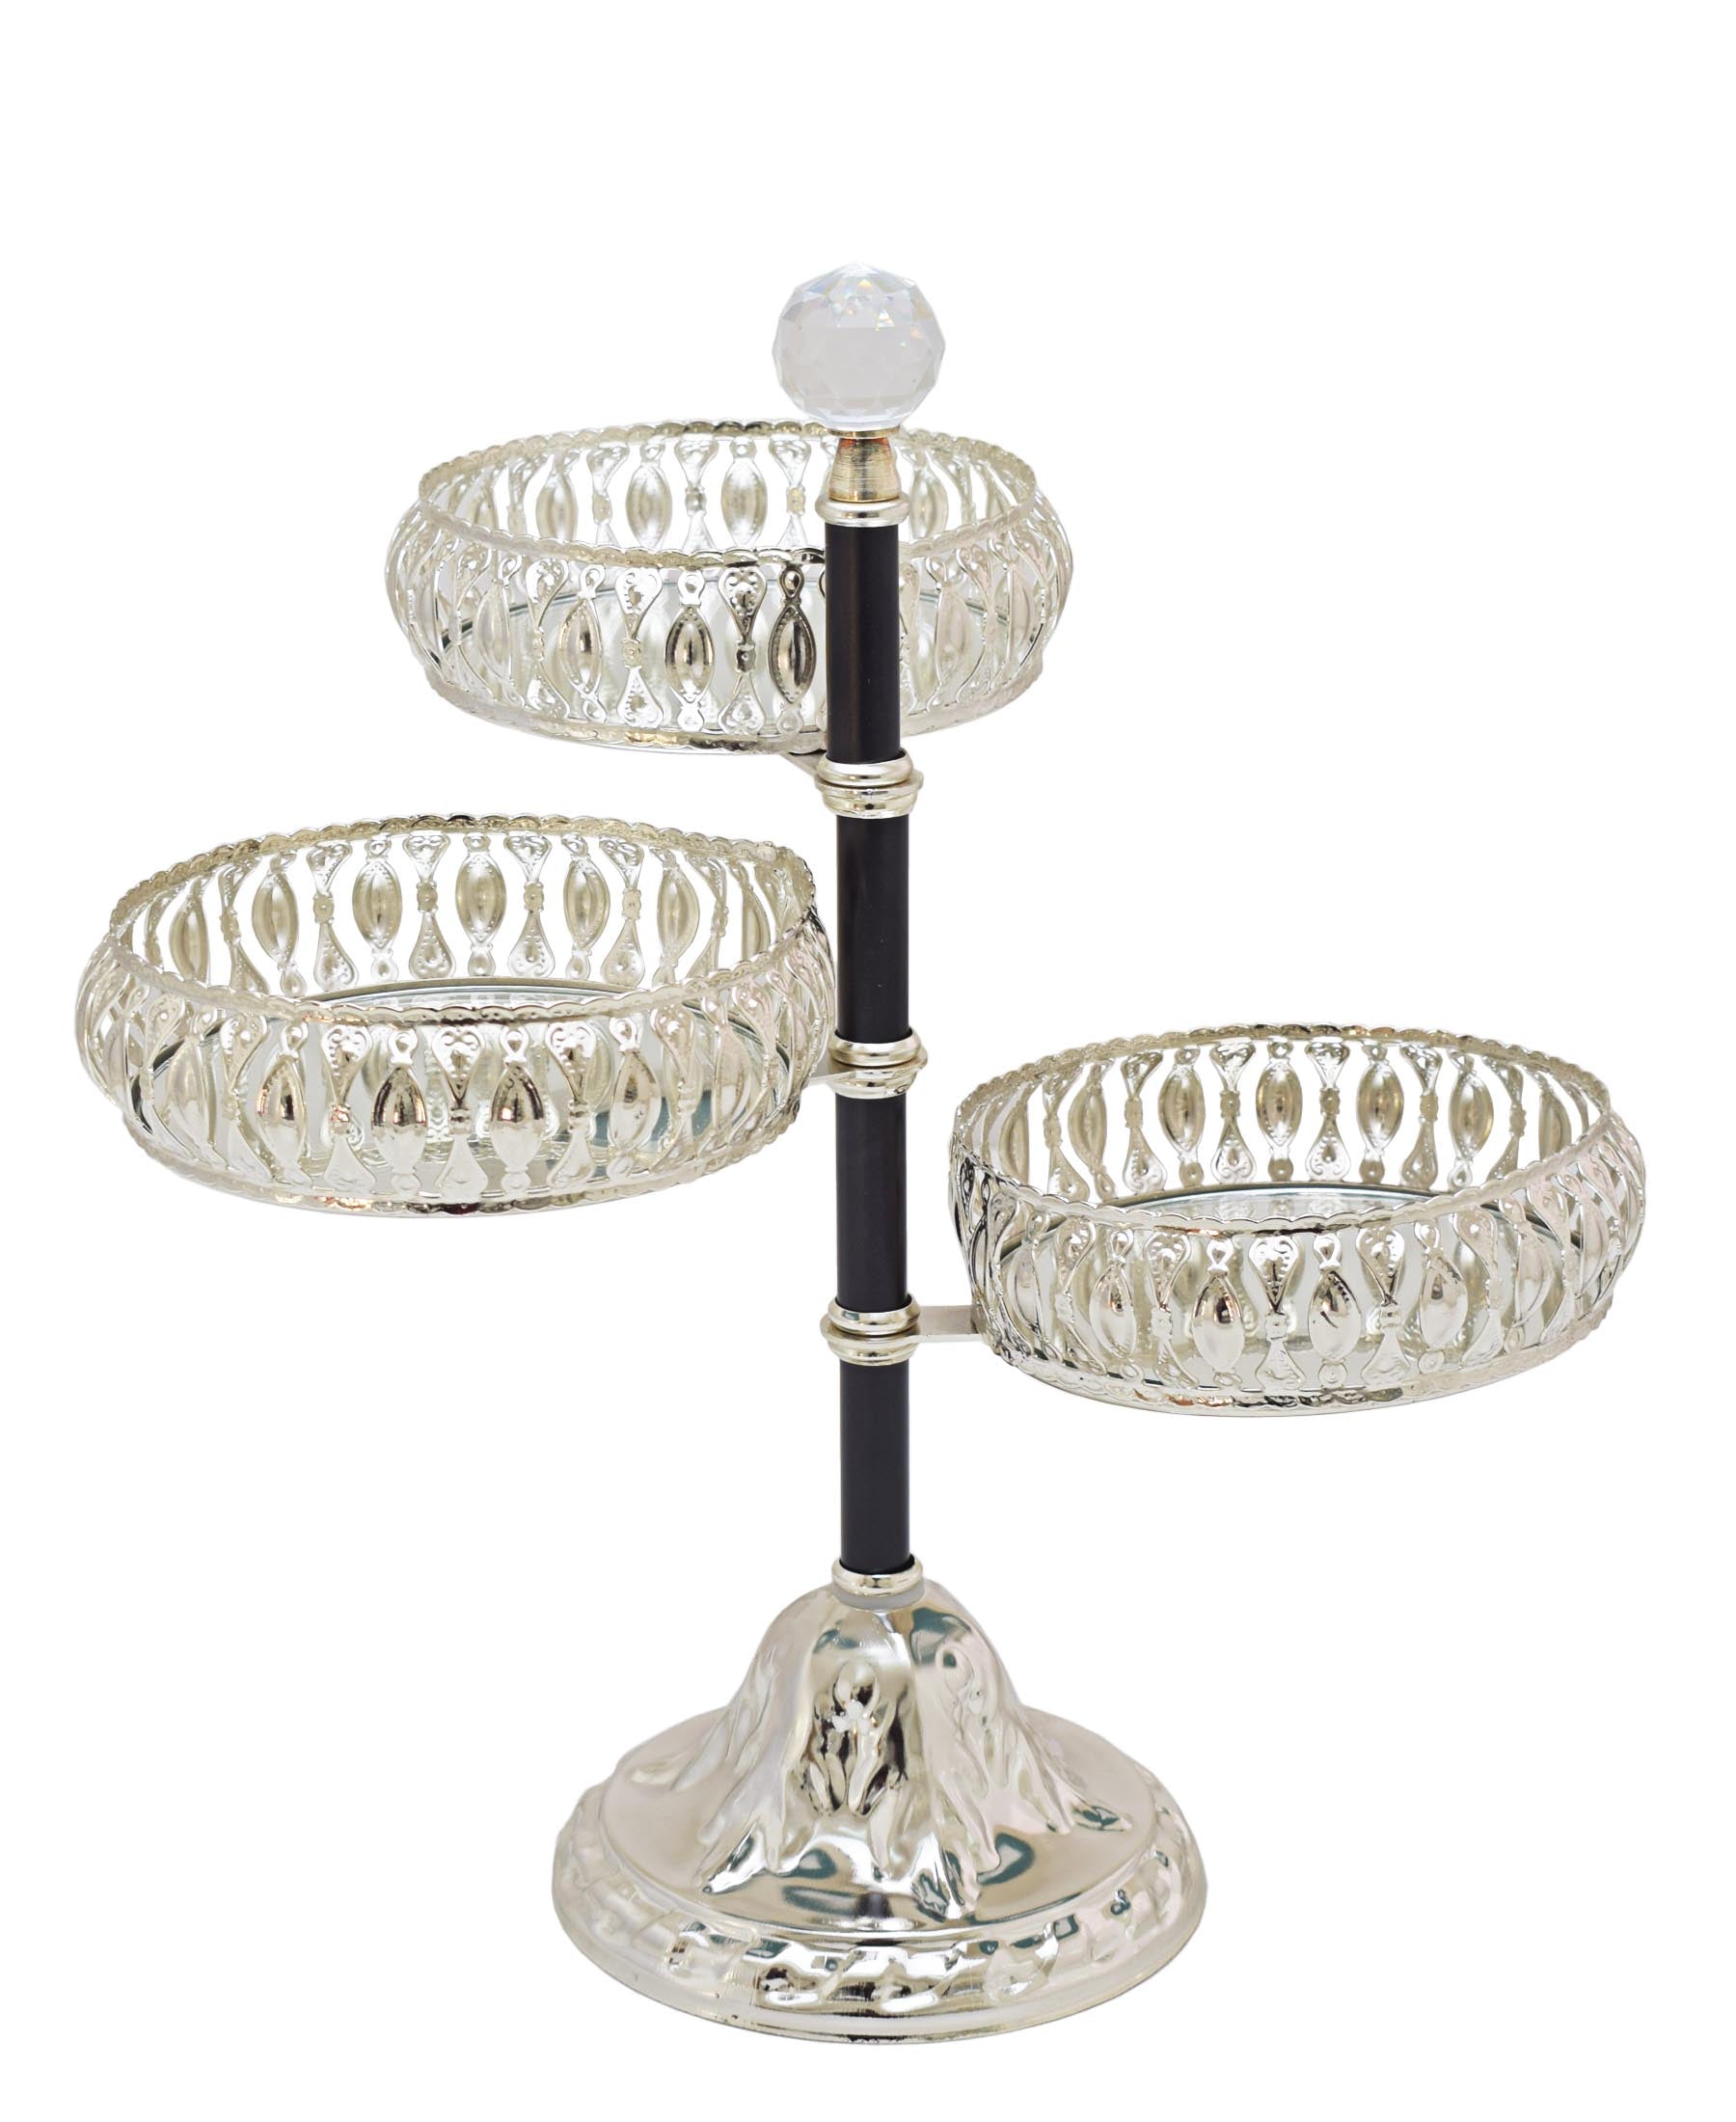 Bursa Collection 3 Tier Cookie Stand - Silver